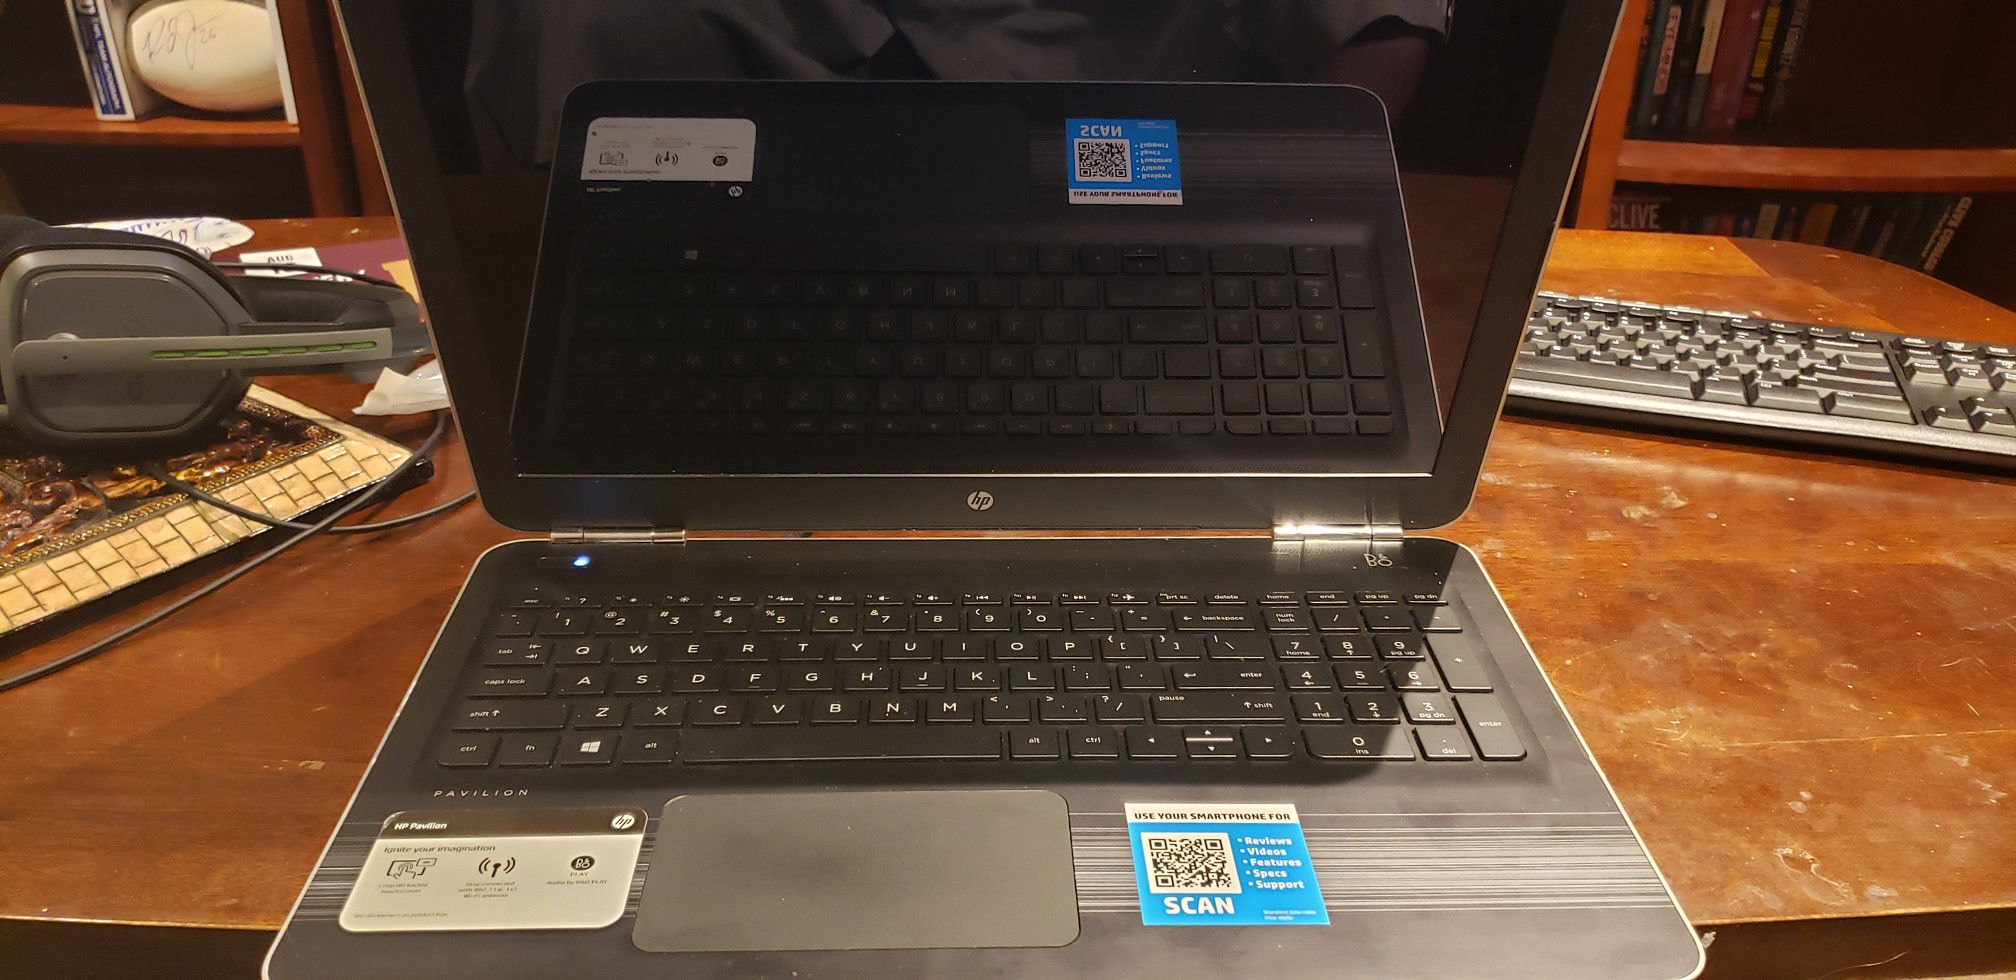 Hp laptop for parts